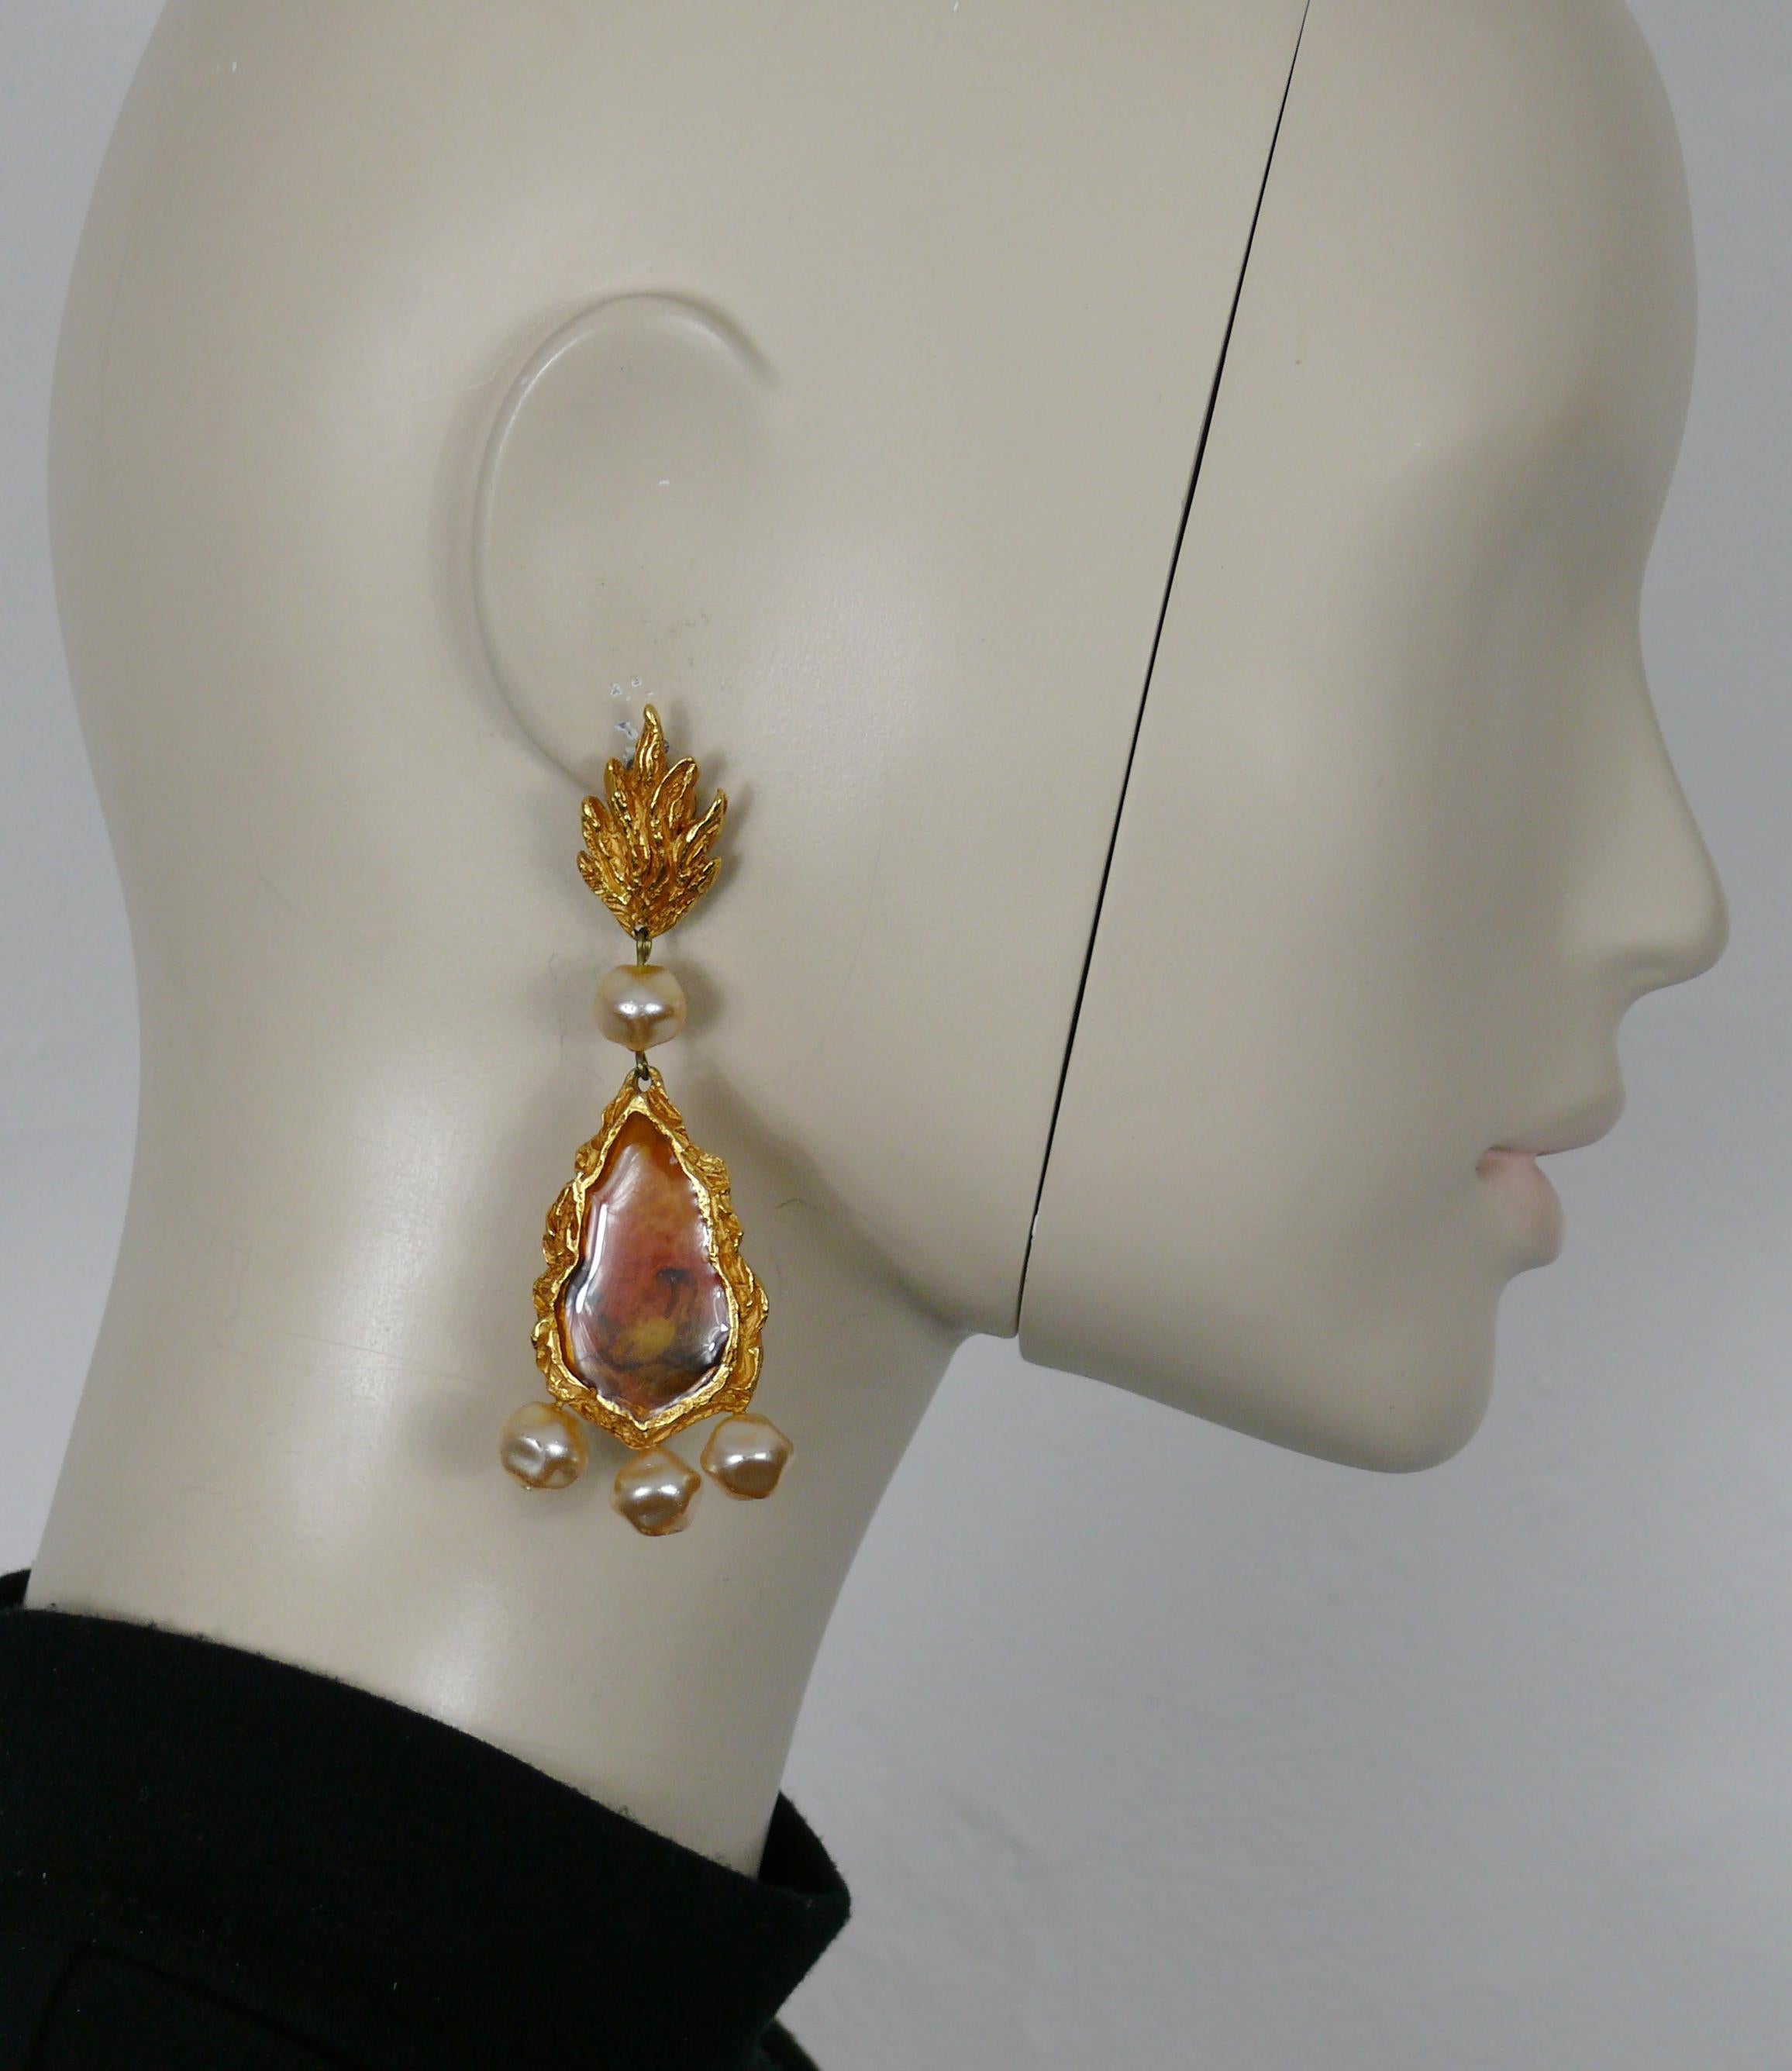 CHRISTIAN LACROIX vintage gold tone dangling earrings (clip-on) embellished with a printed inlaid and faux pearls.

Marked CHRISTIAN LACROIX CL Made in France.

Indicative measurements : max. height approx. 9 cm (3.54 inches) / max. width approx.